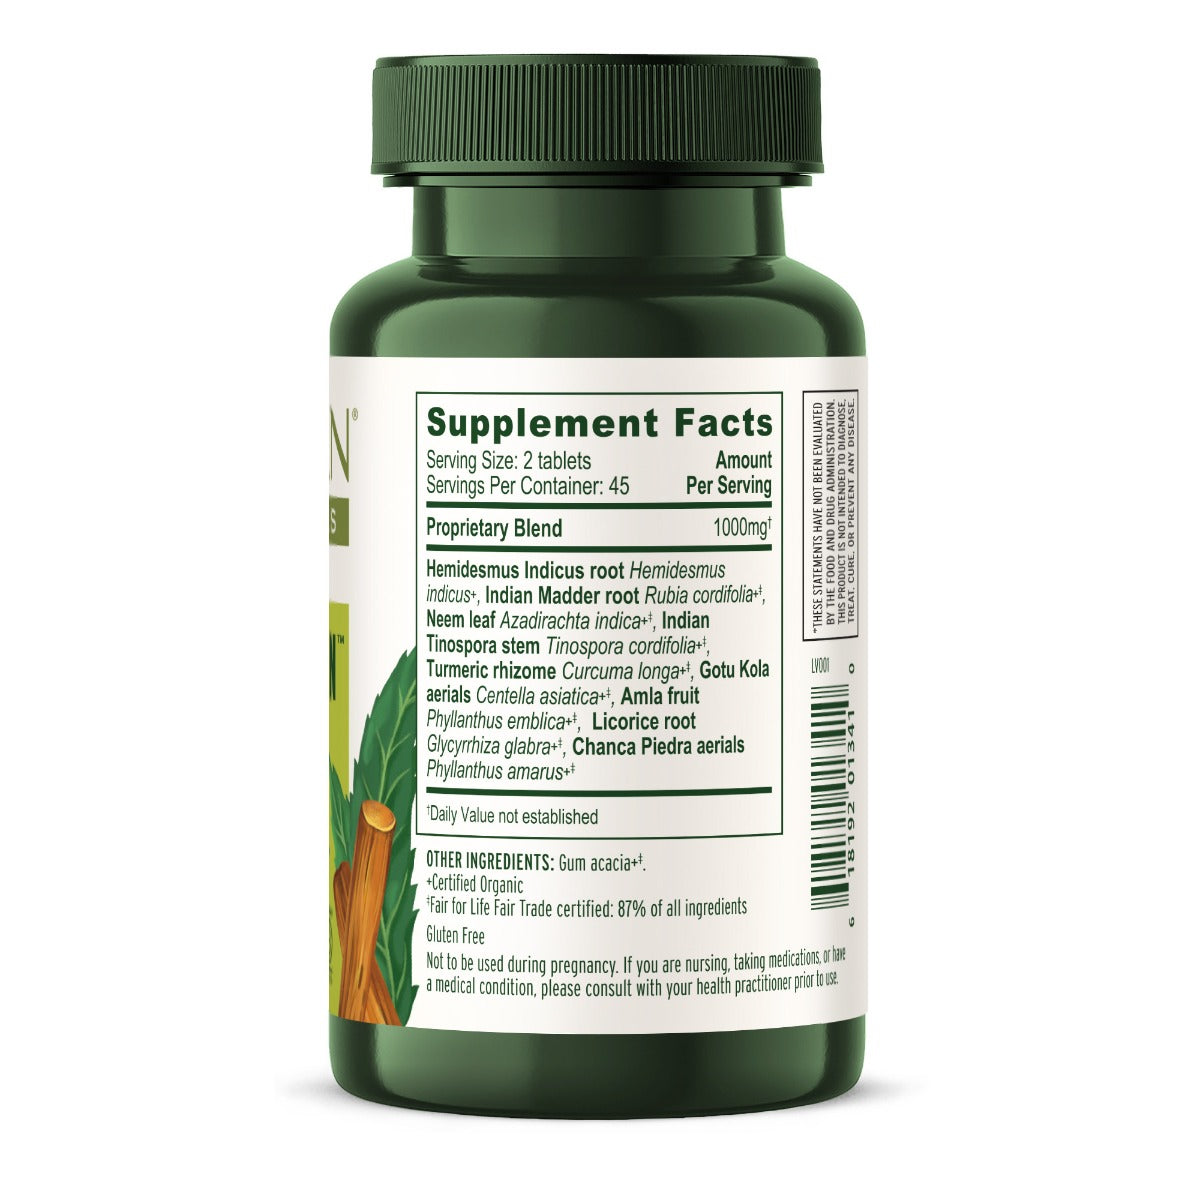 Healthy Skin supplement Facts Label